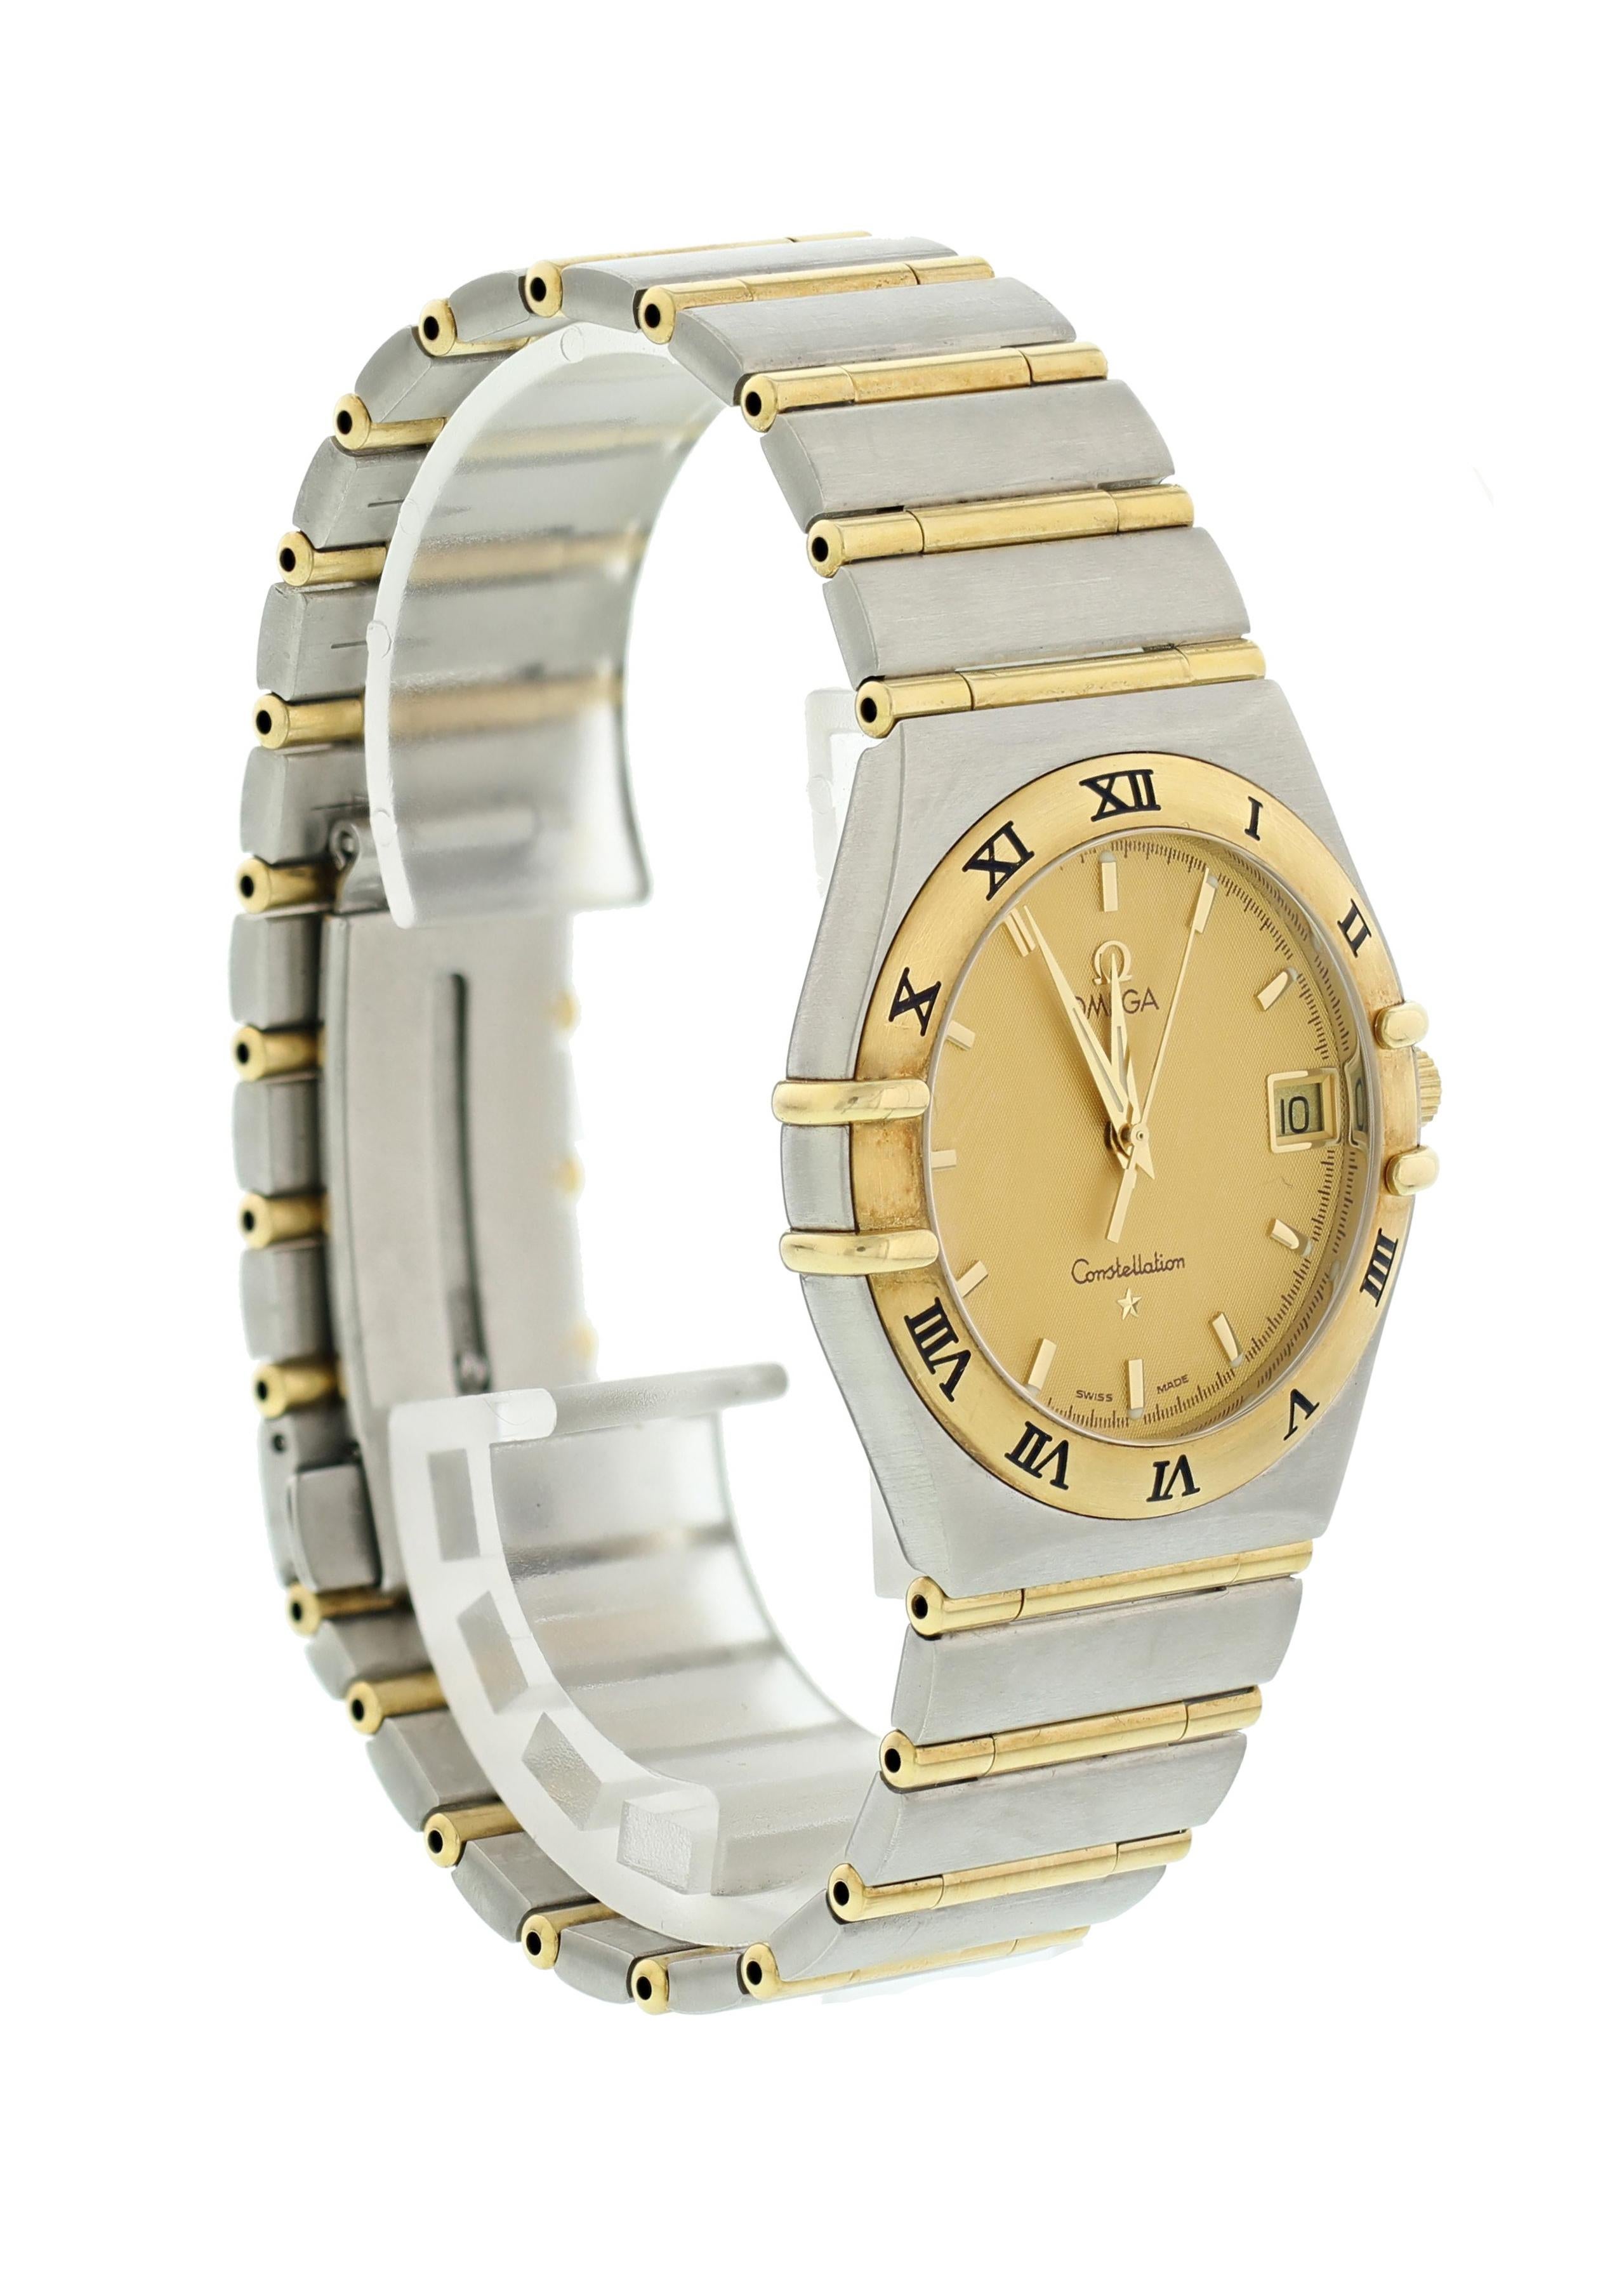 Omega Constellation Men's Watch In Excellent Condition For Sale In New York, NY